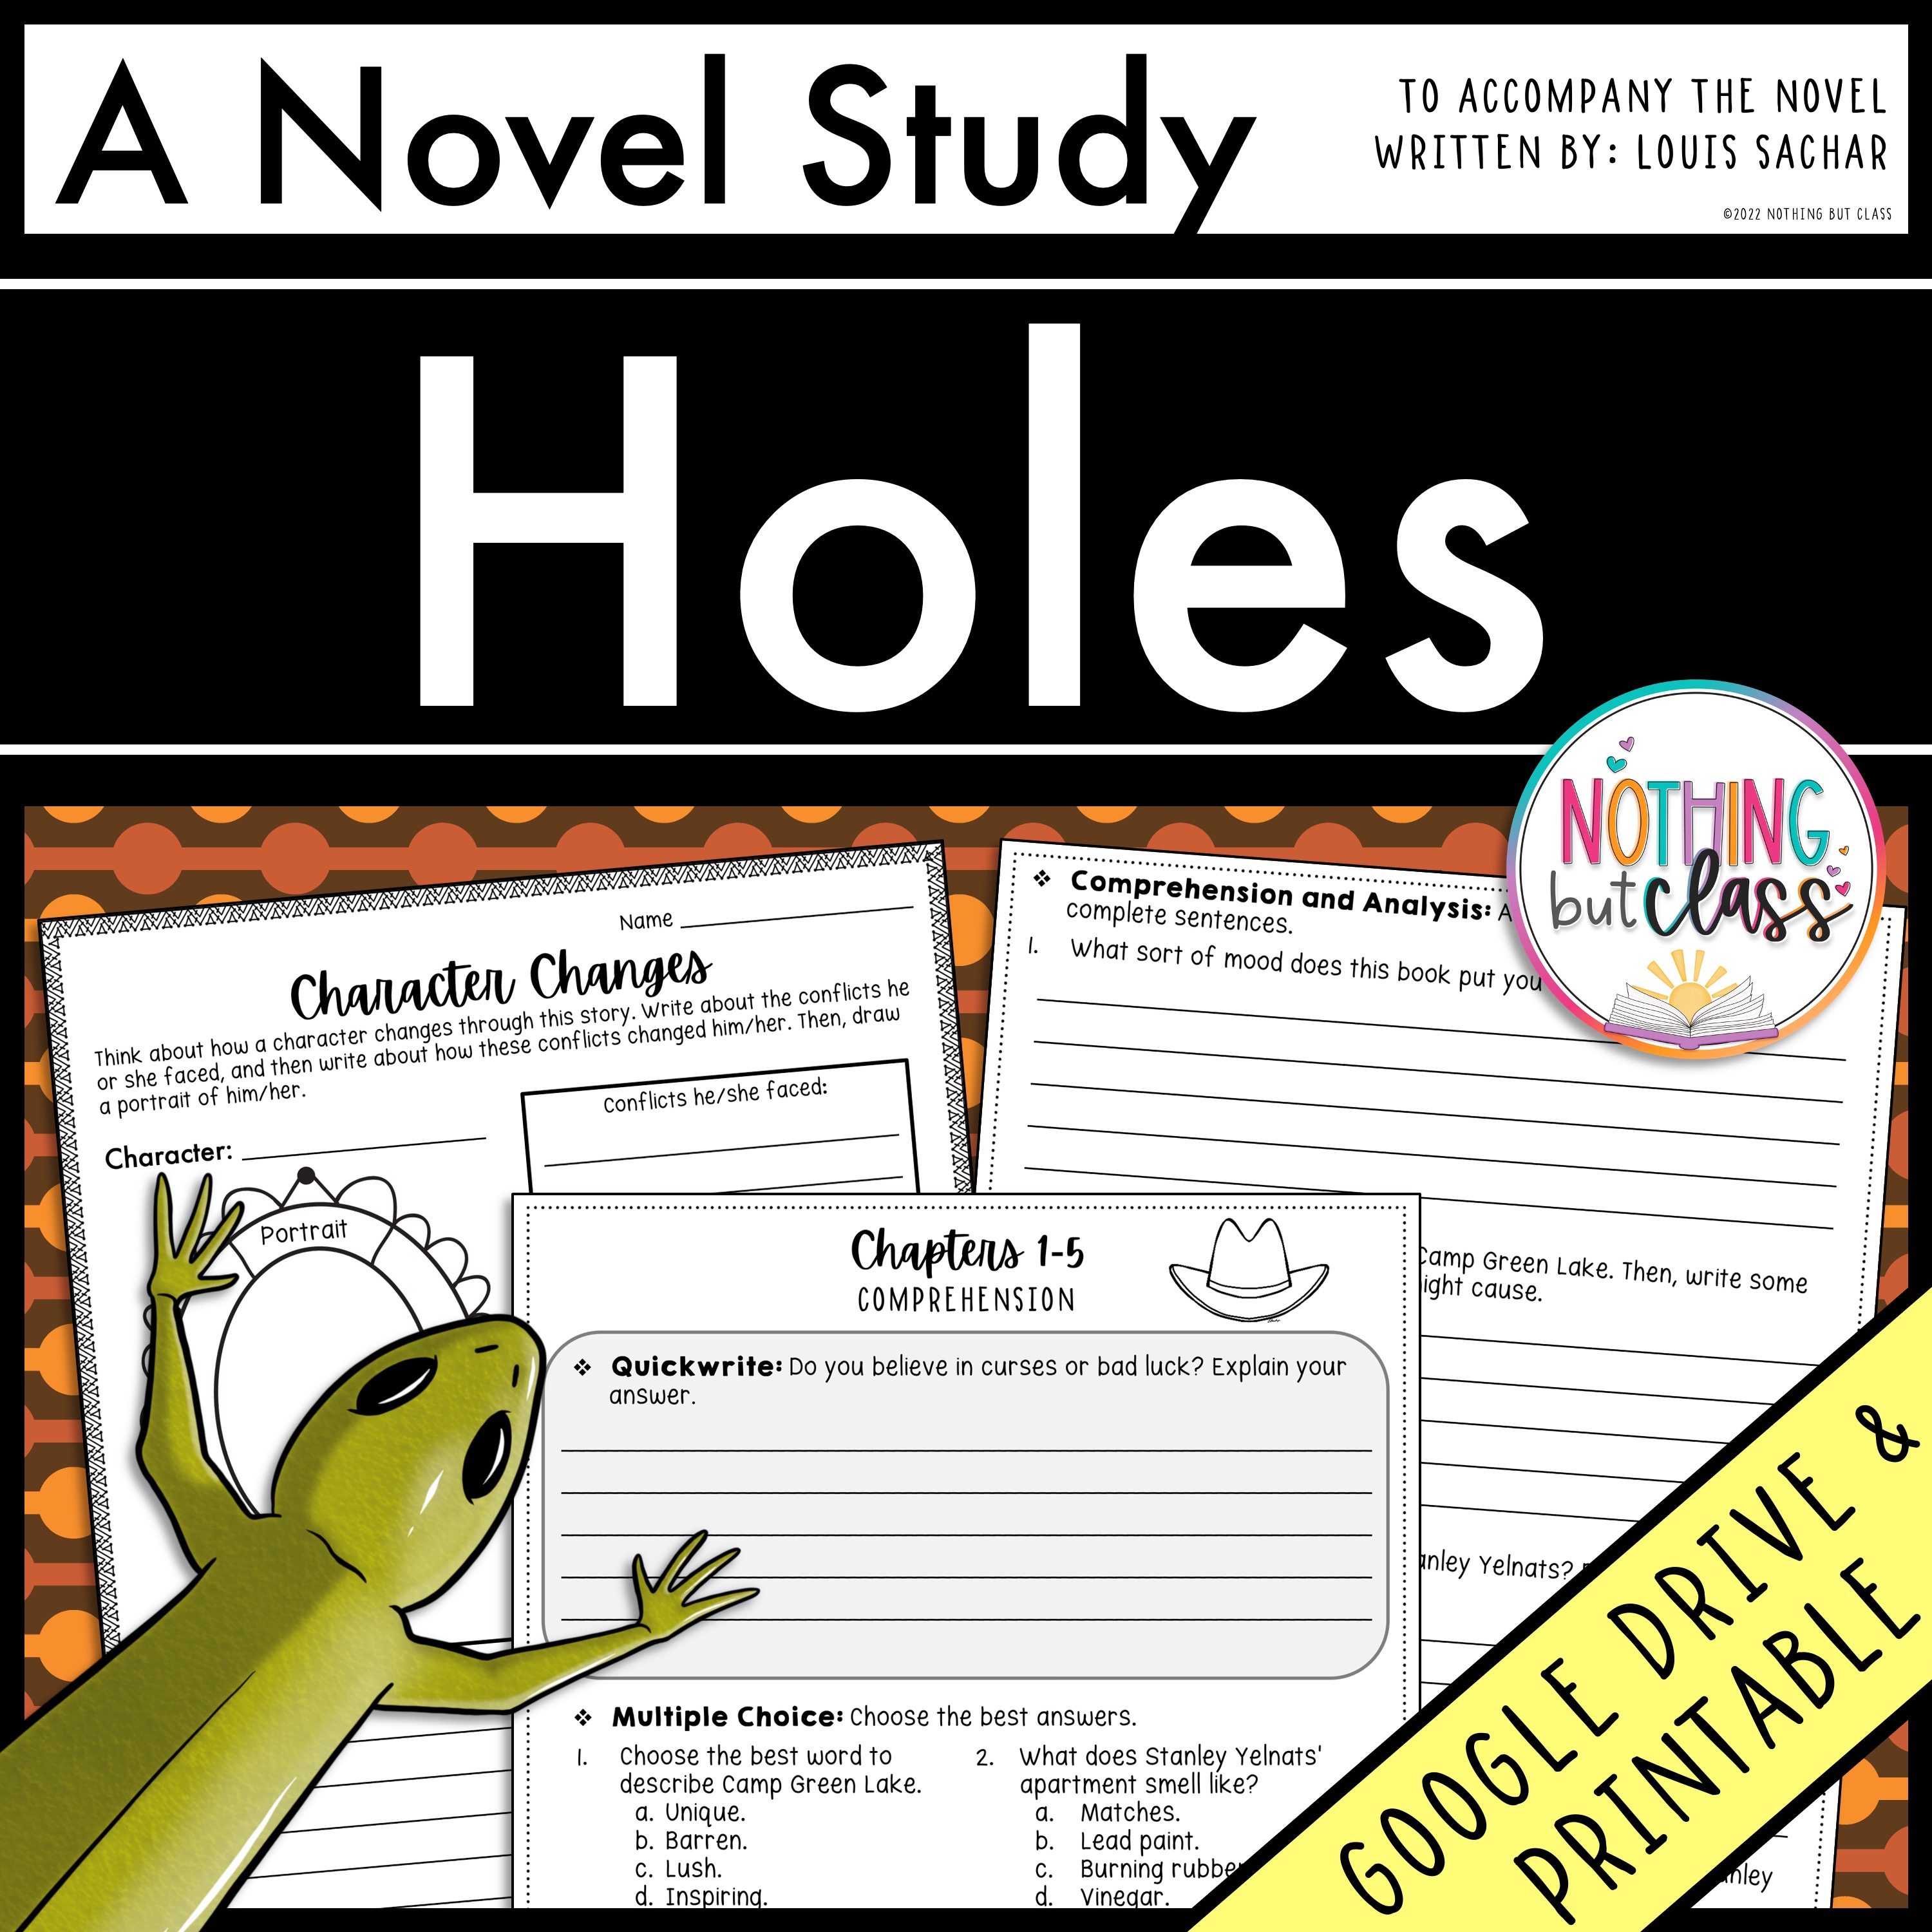 Holes by Louis Sachar  Summary, Setting & Analysis - Video